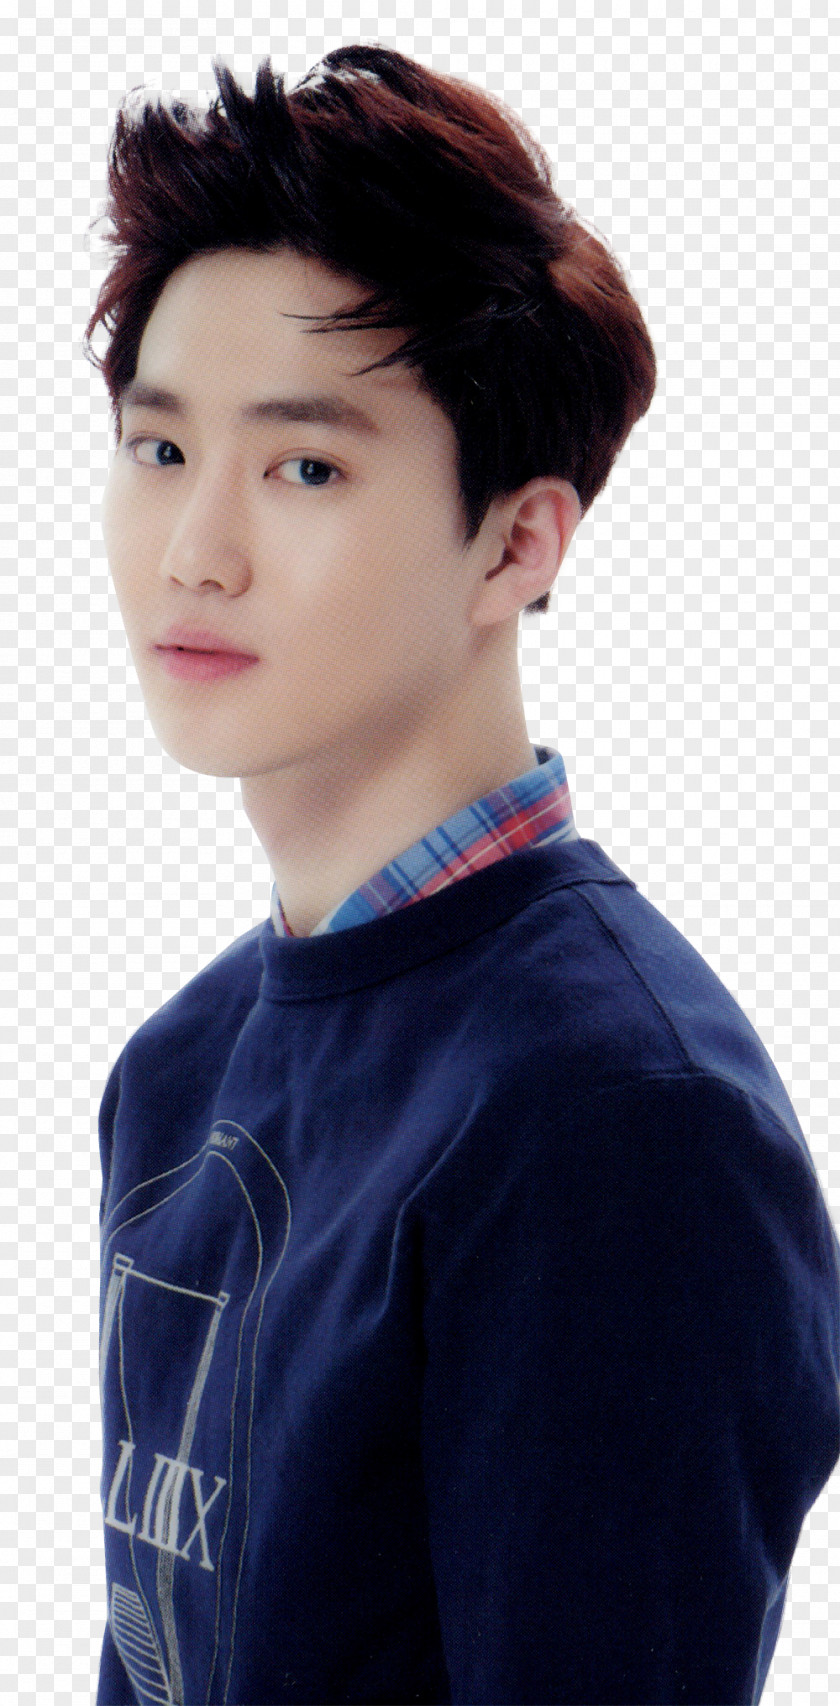 Suho Exo EXO K-pop Image PNG